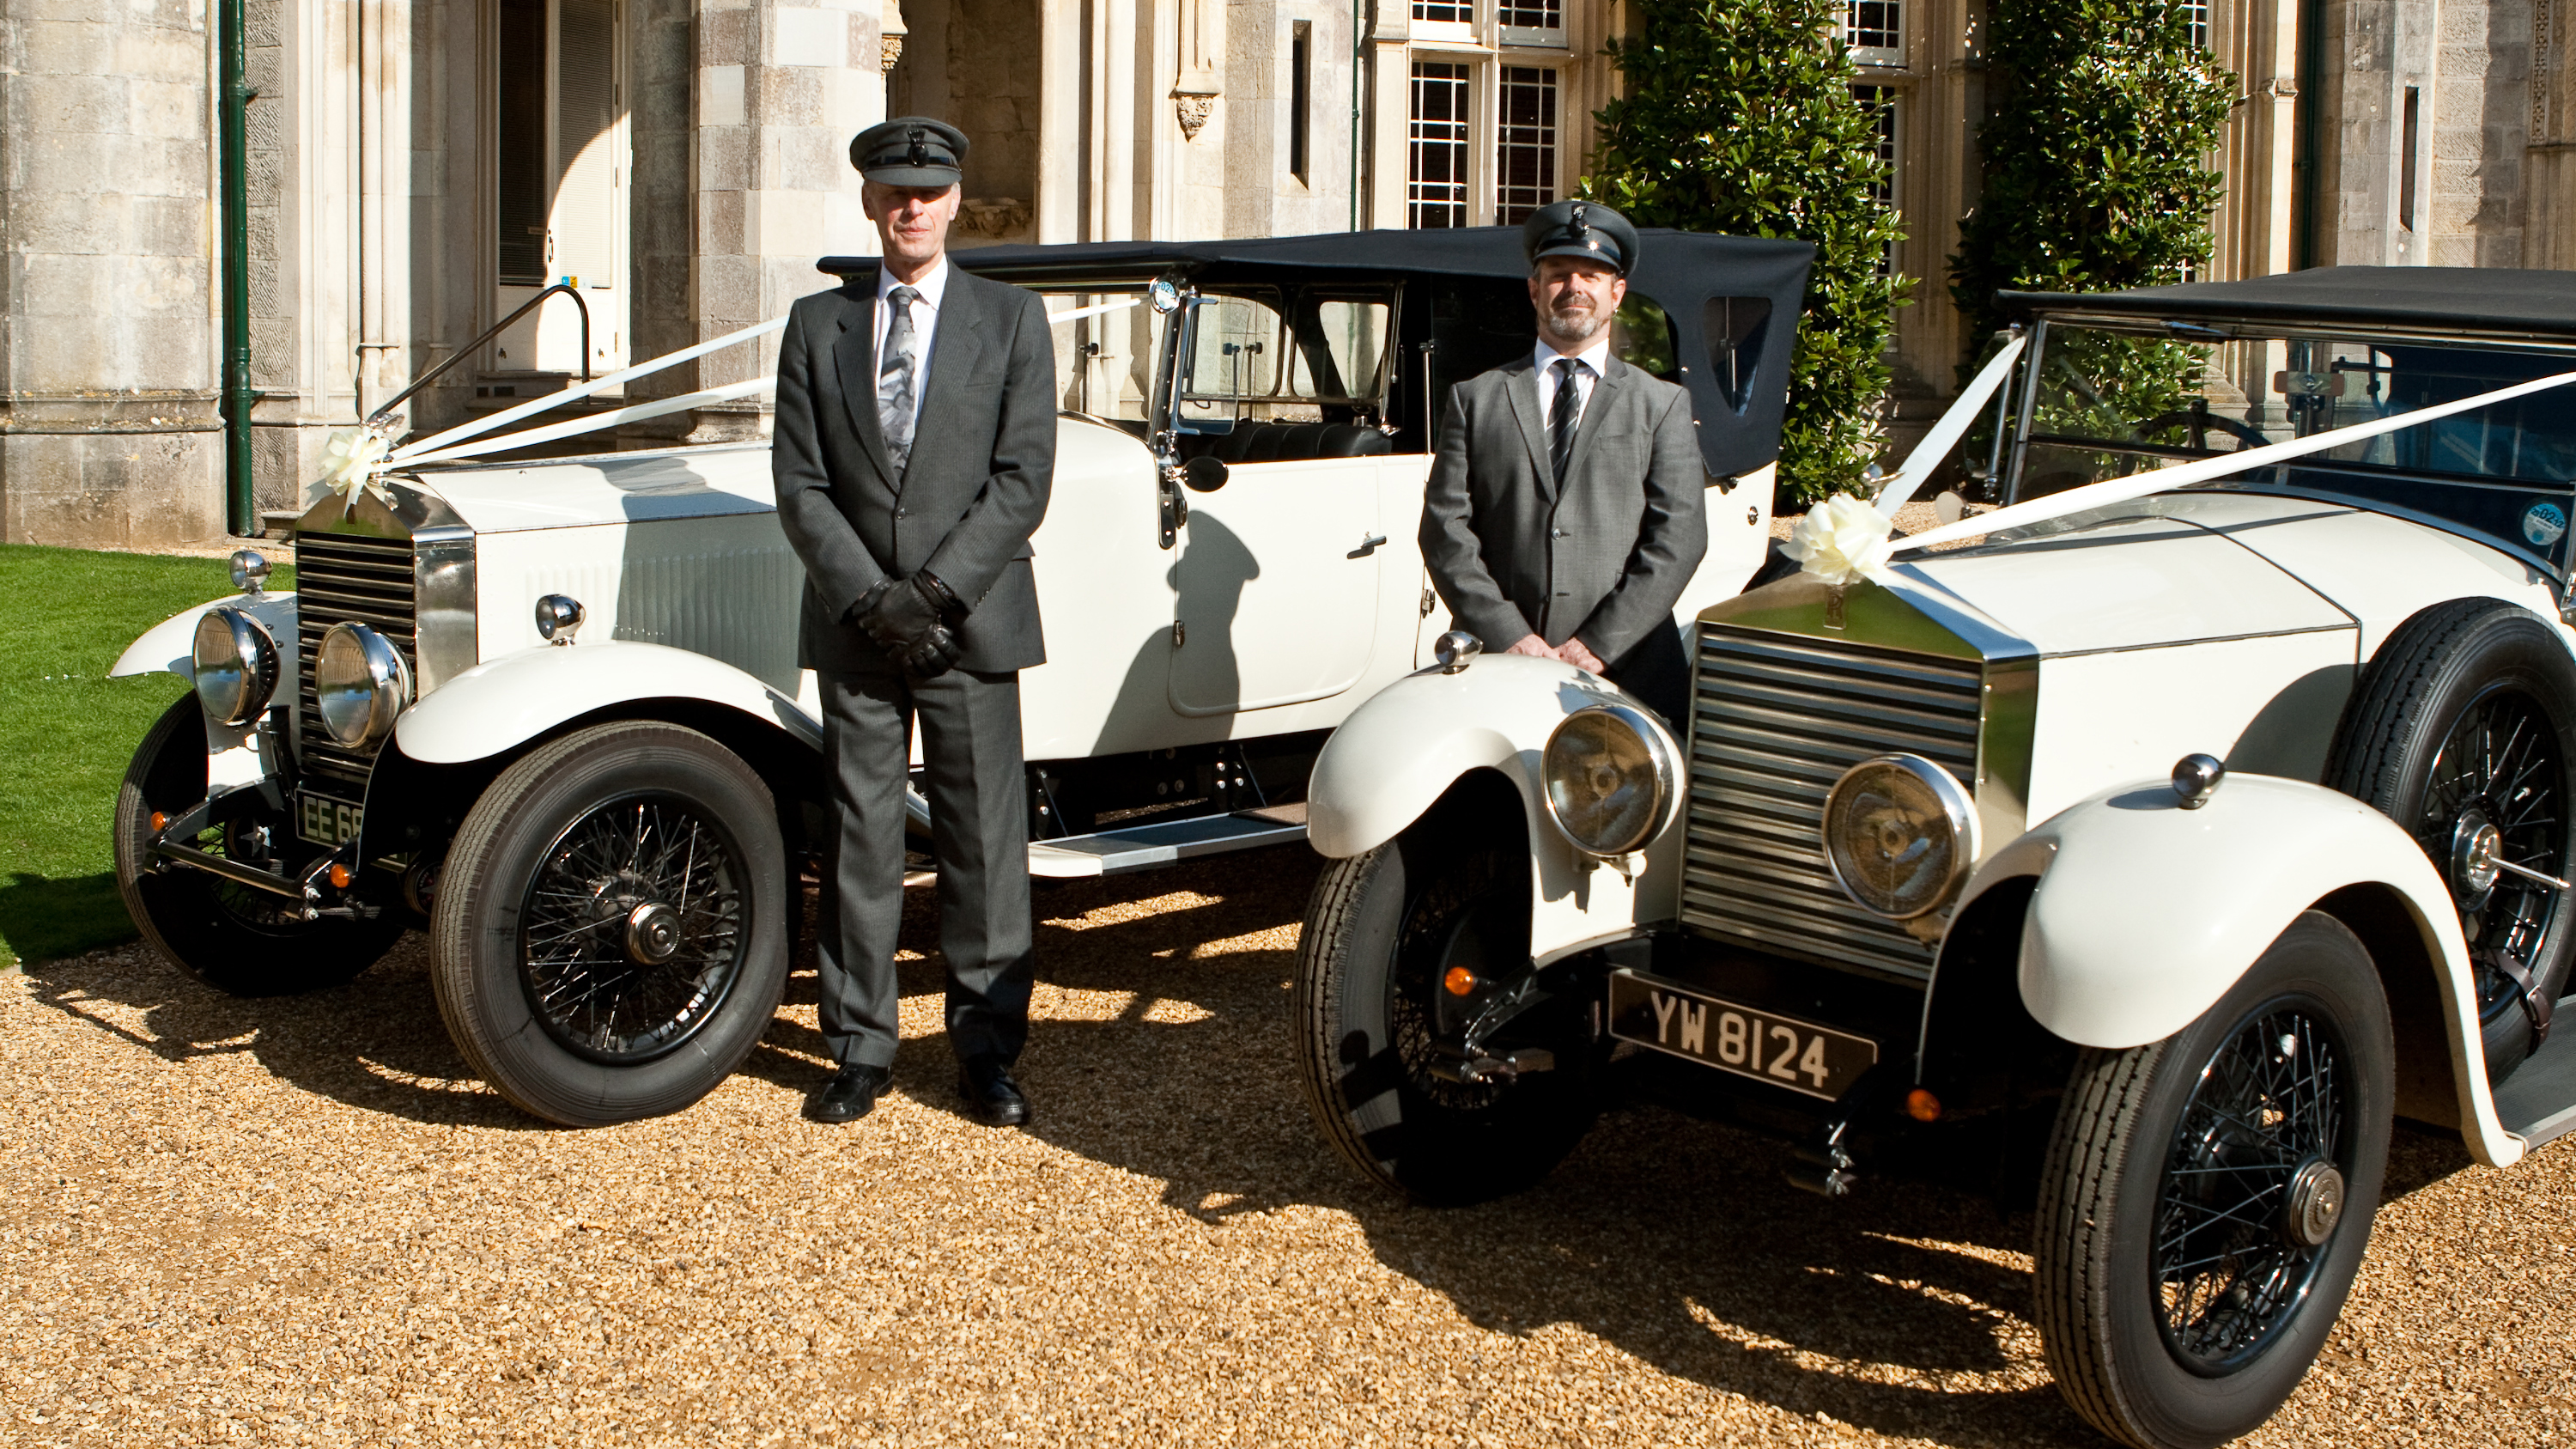 Two vintage wedding cars decorated with white ribbons and bows at a local Abbotsbury wedding. Both vehicles are parked side-by-side with their chauffeurs next to them.